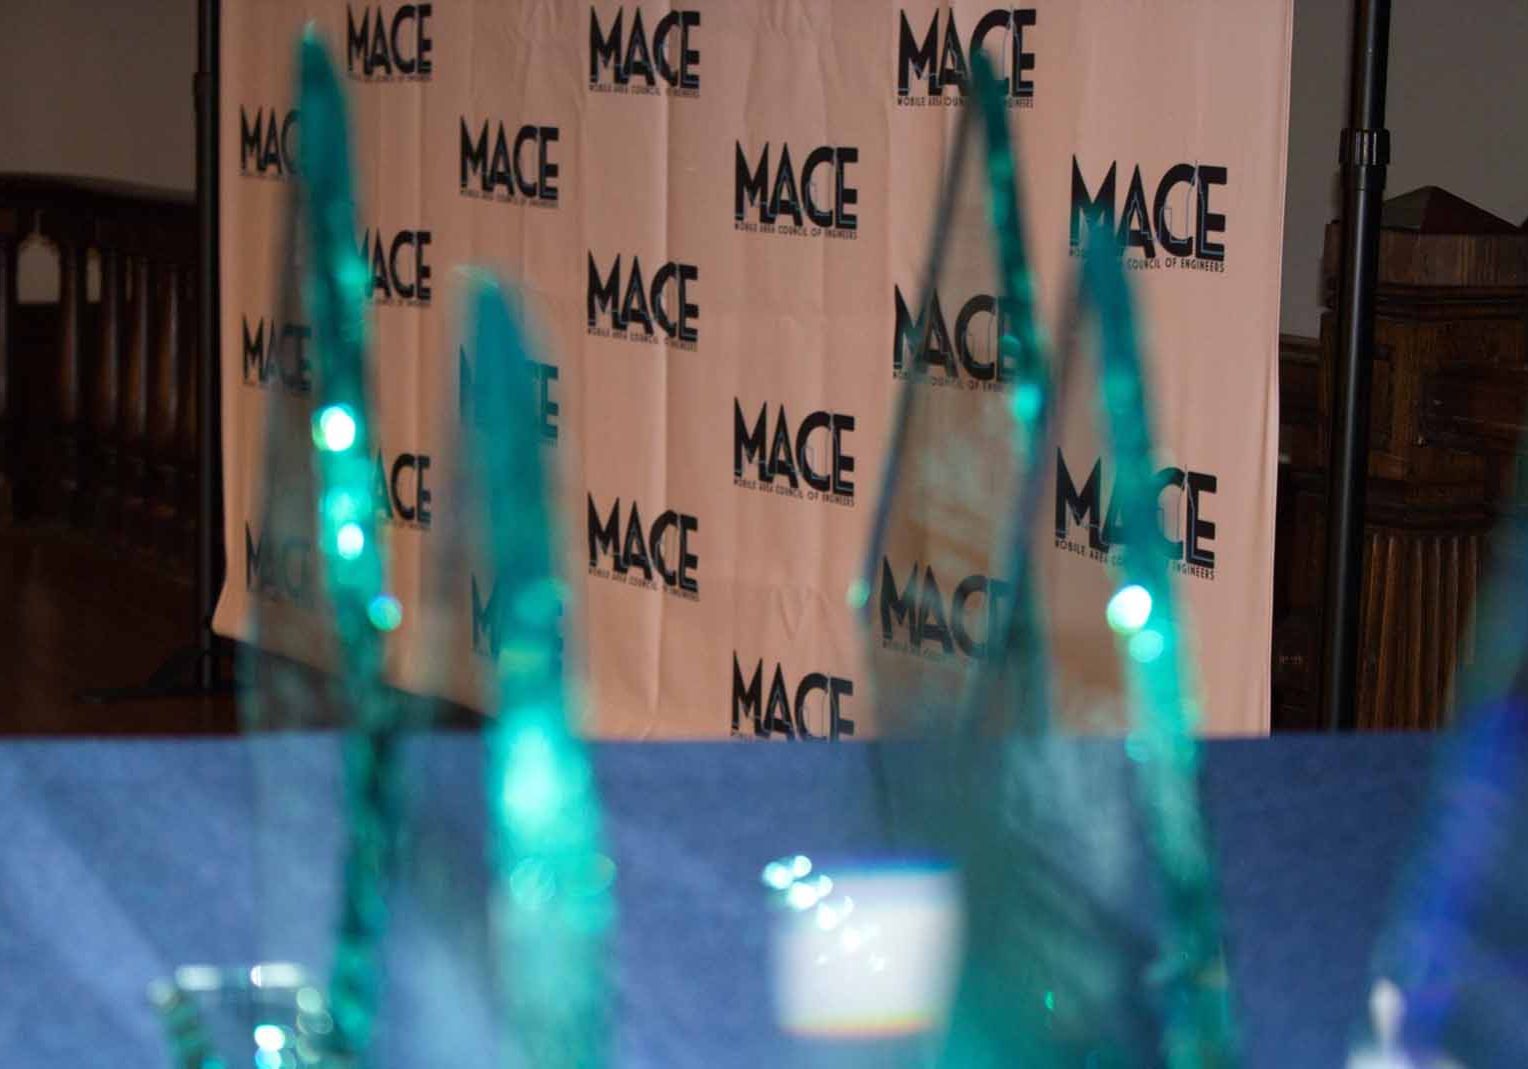 Tickets/Sponsorships Available For MACE Awards